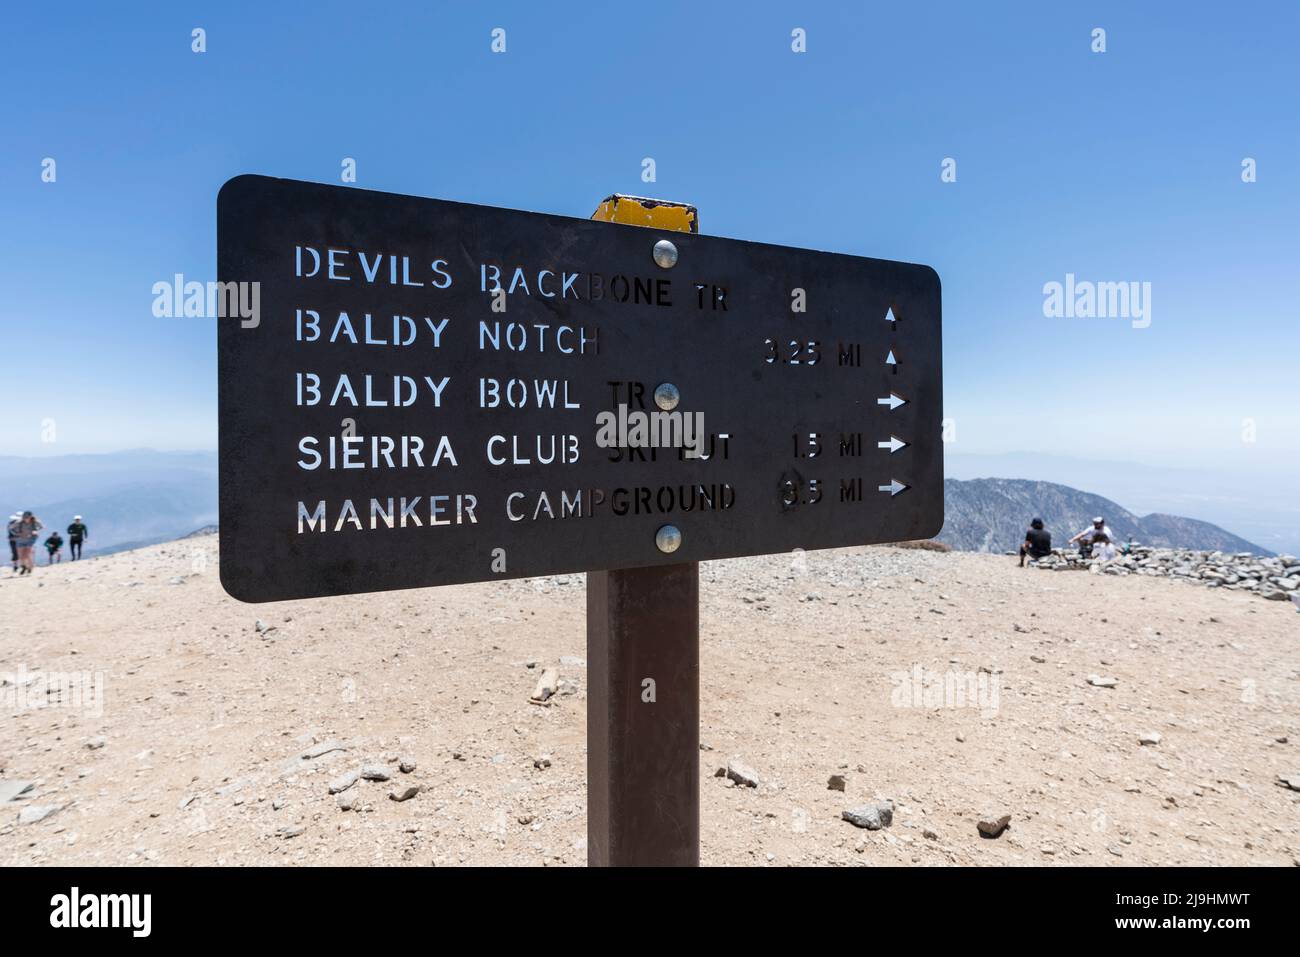 Mt Baldy, California, USA - May 22, 2022:  View of Devils Backbone trail sign and hikers on the summit of Mt Baldy in the San Gabriel Mountains. Stock Photo